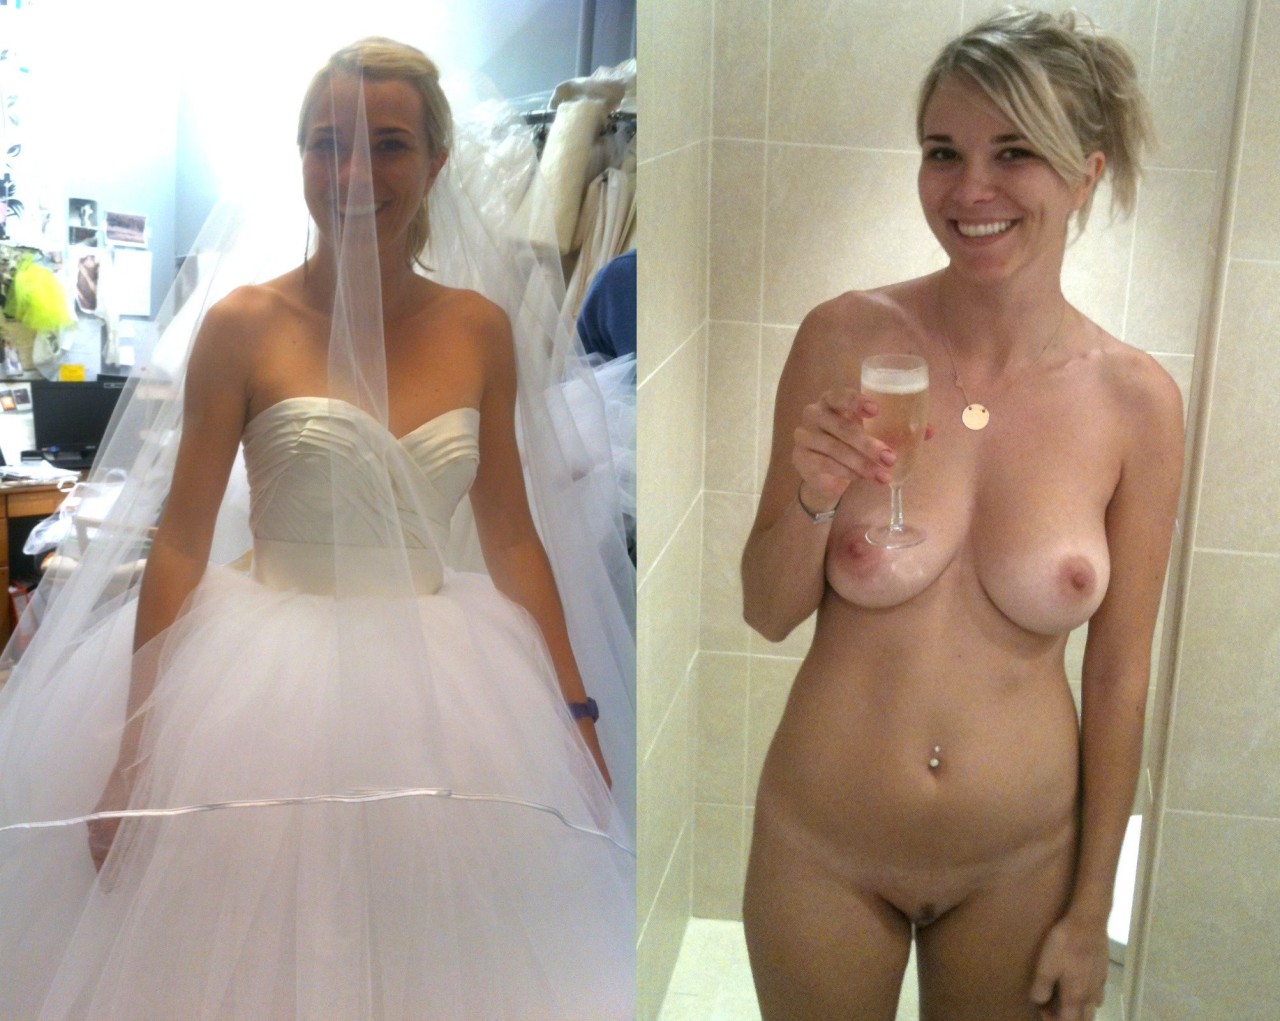 Horny brides and bridesmaids lingerie free sex